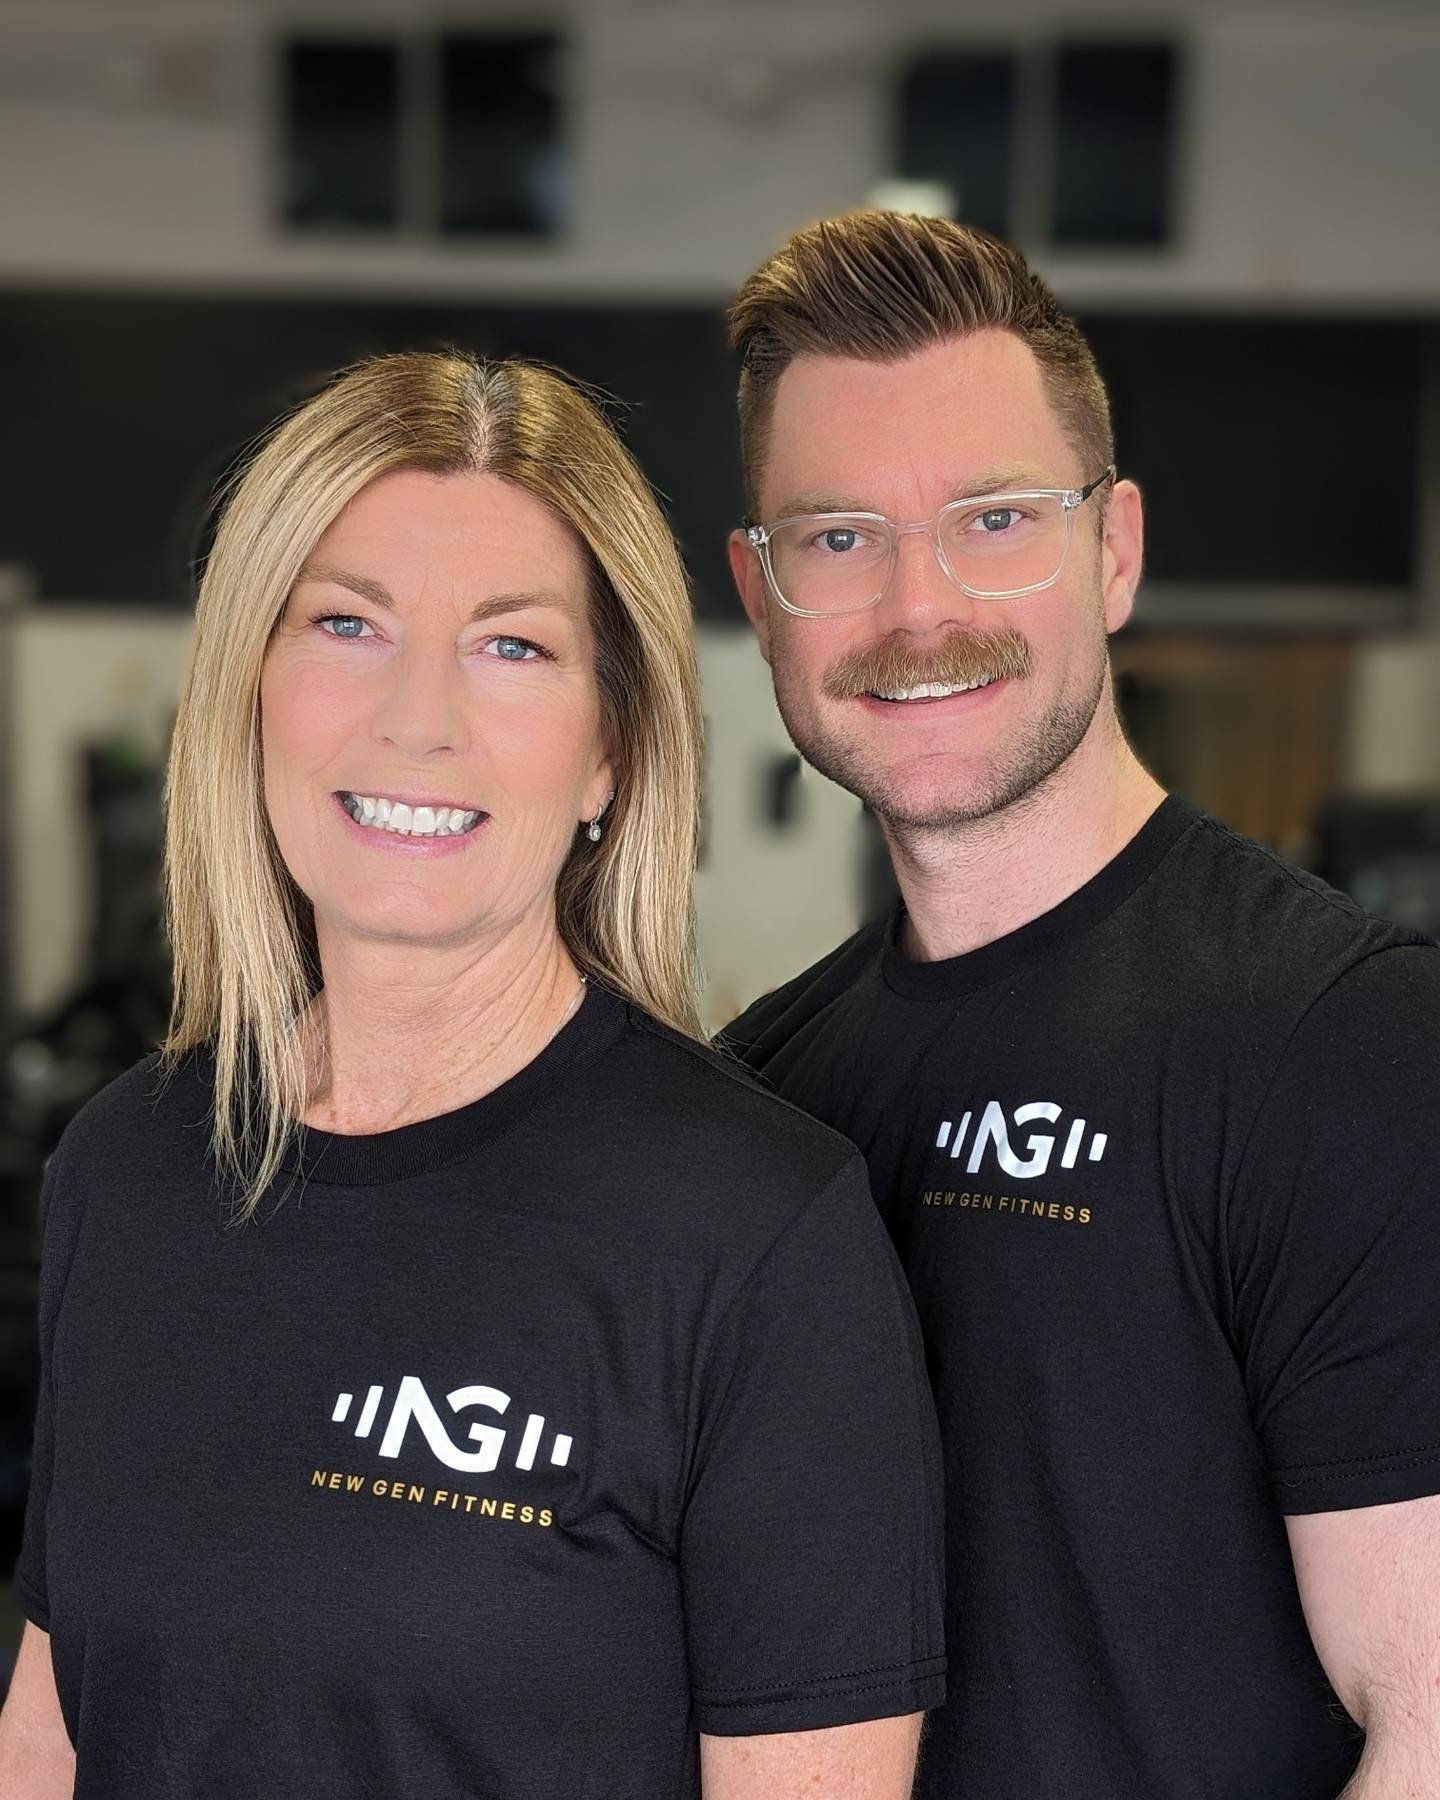 A little bit about us! @rhonda.d.shannon and myself ( @aaron_shannon.pt ) are a mother-son duo that have had a fierce passion for health and wellness our entire lives. Yes, I know we look more like siblings; we get that all the time lol. 

Anyways, I